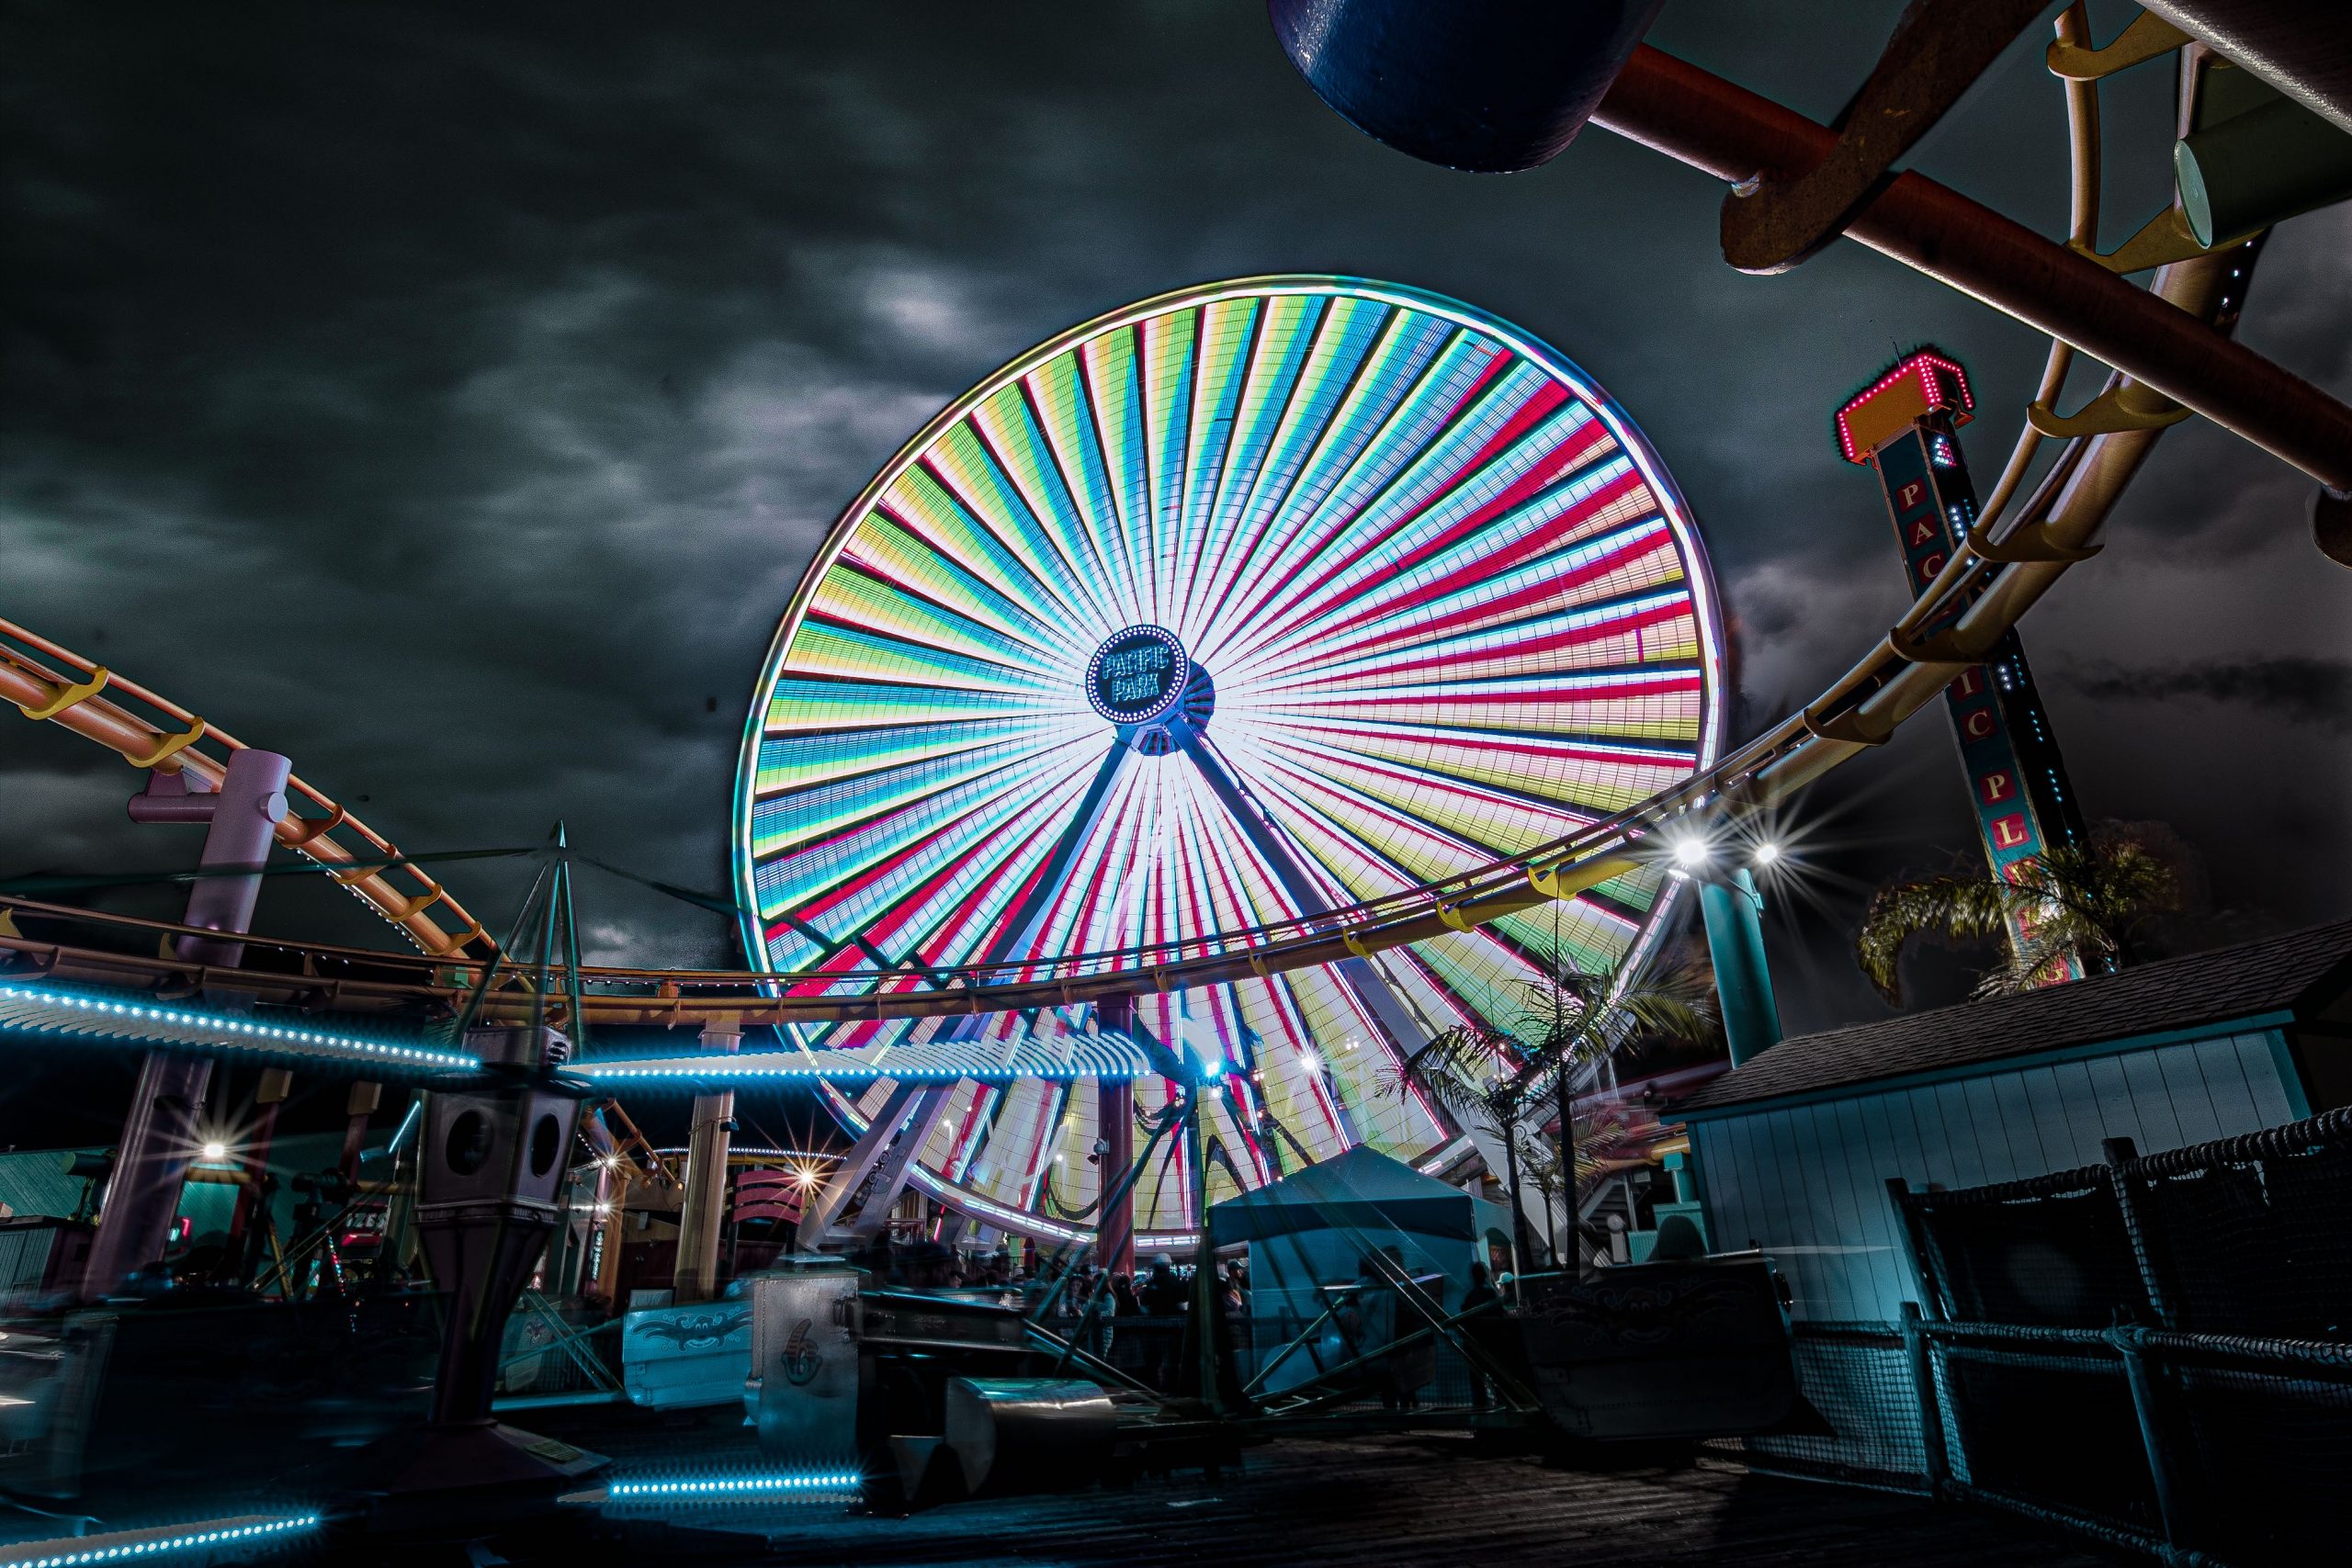 The Pacific Wheel lit up at night on the Santa Monica Pier